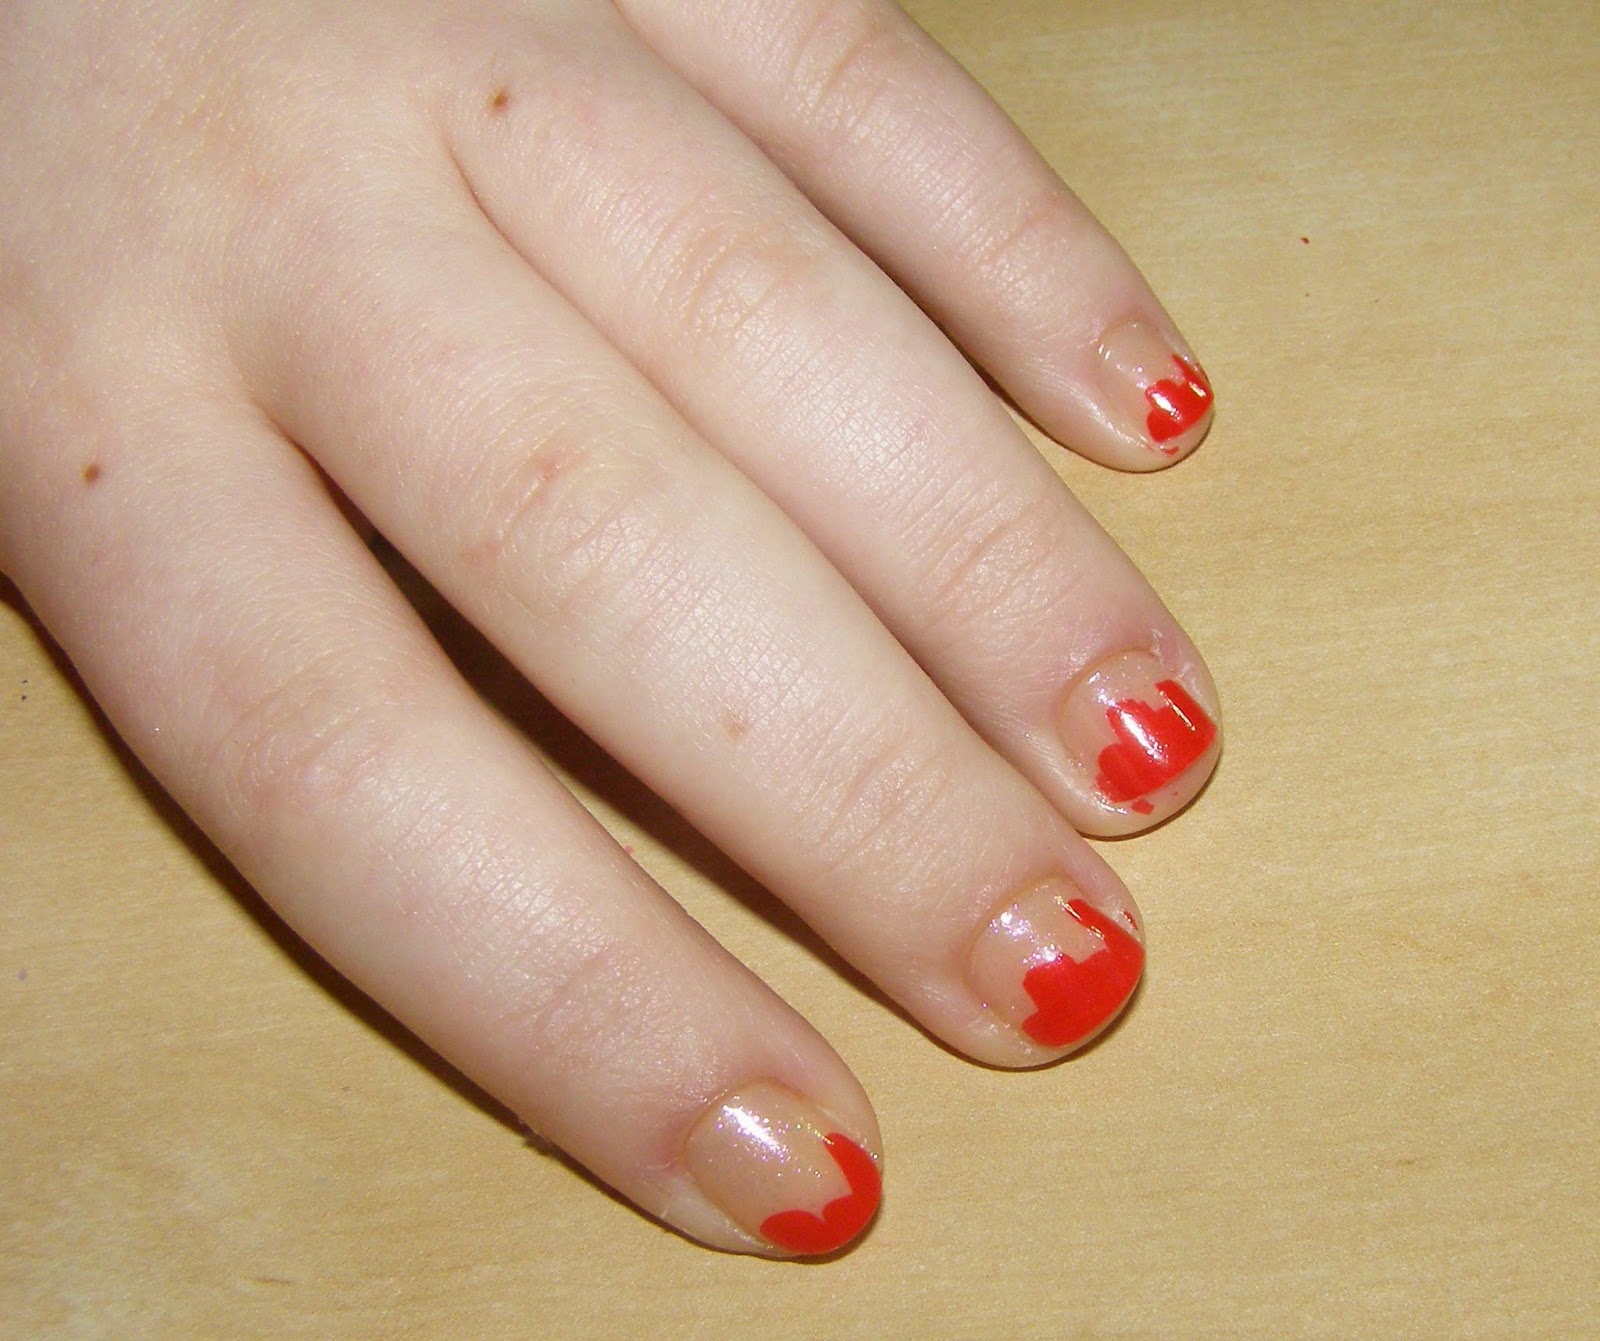 Alluring Alyss Beauty *:･ﾟ : Blood French Manicure Nail Art~!